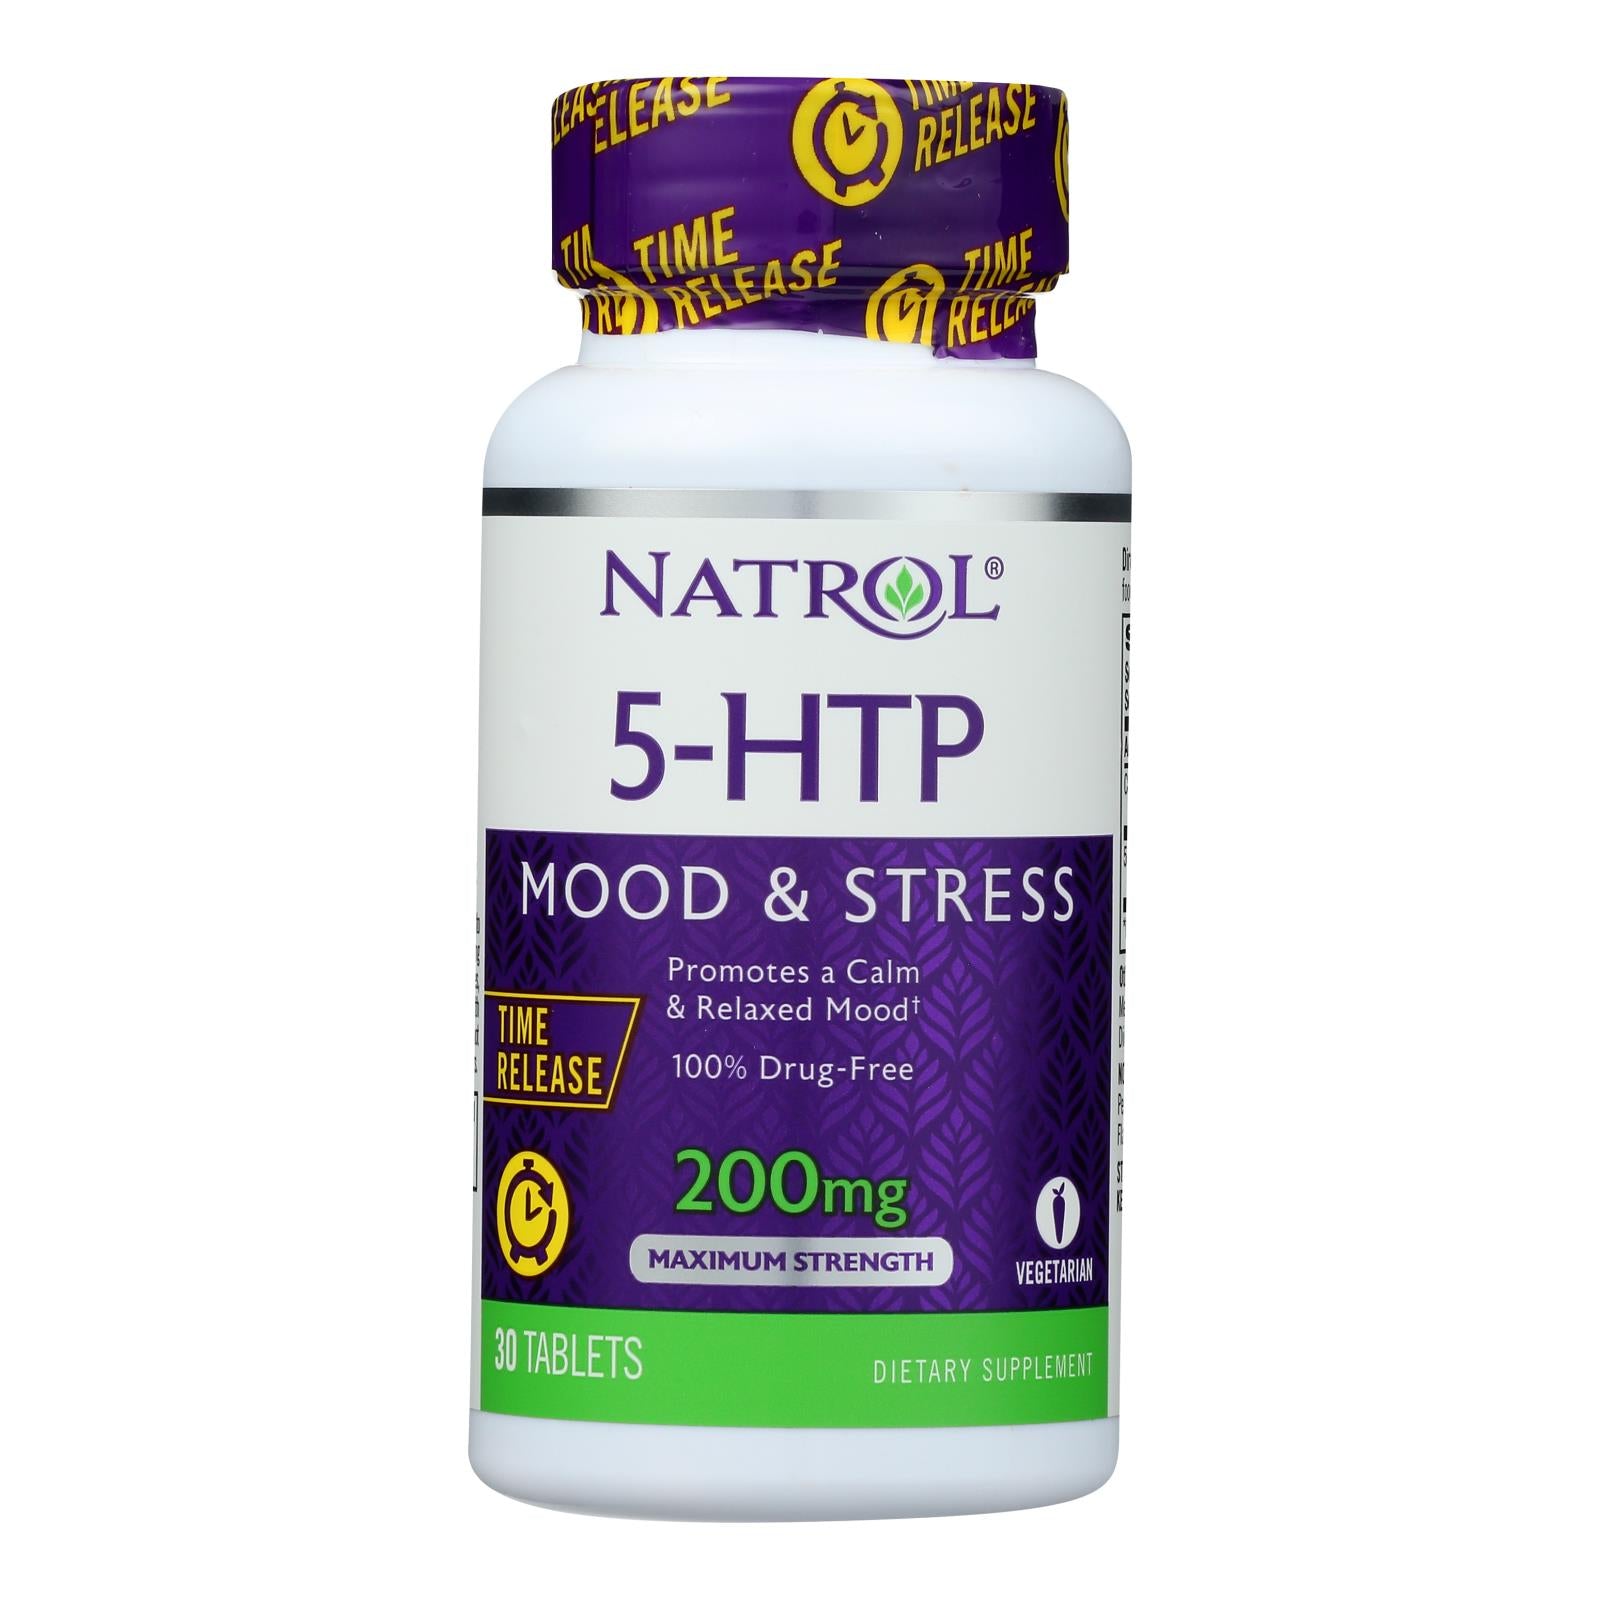 Natrol 5-htp Tr Time Release - 200 Mg - 30 Tablets